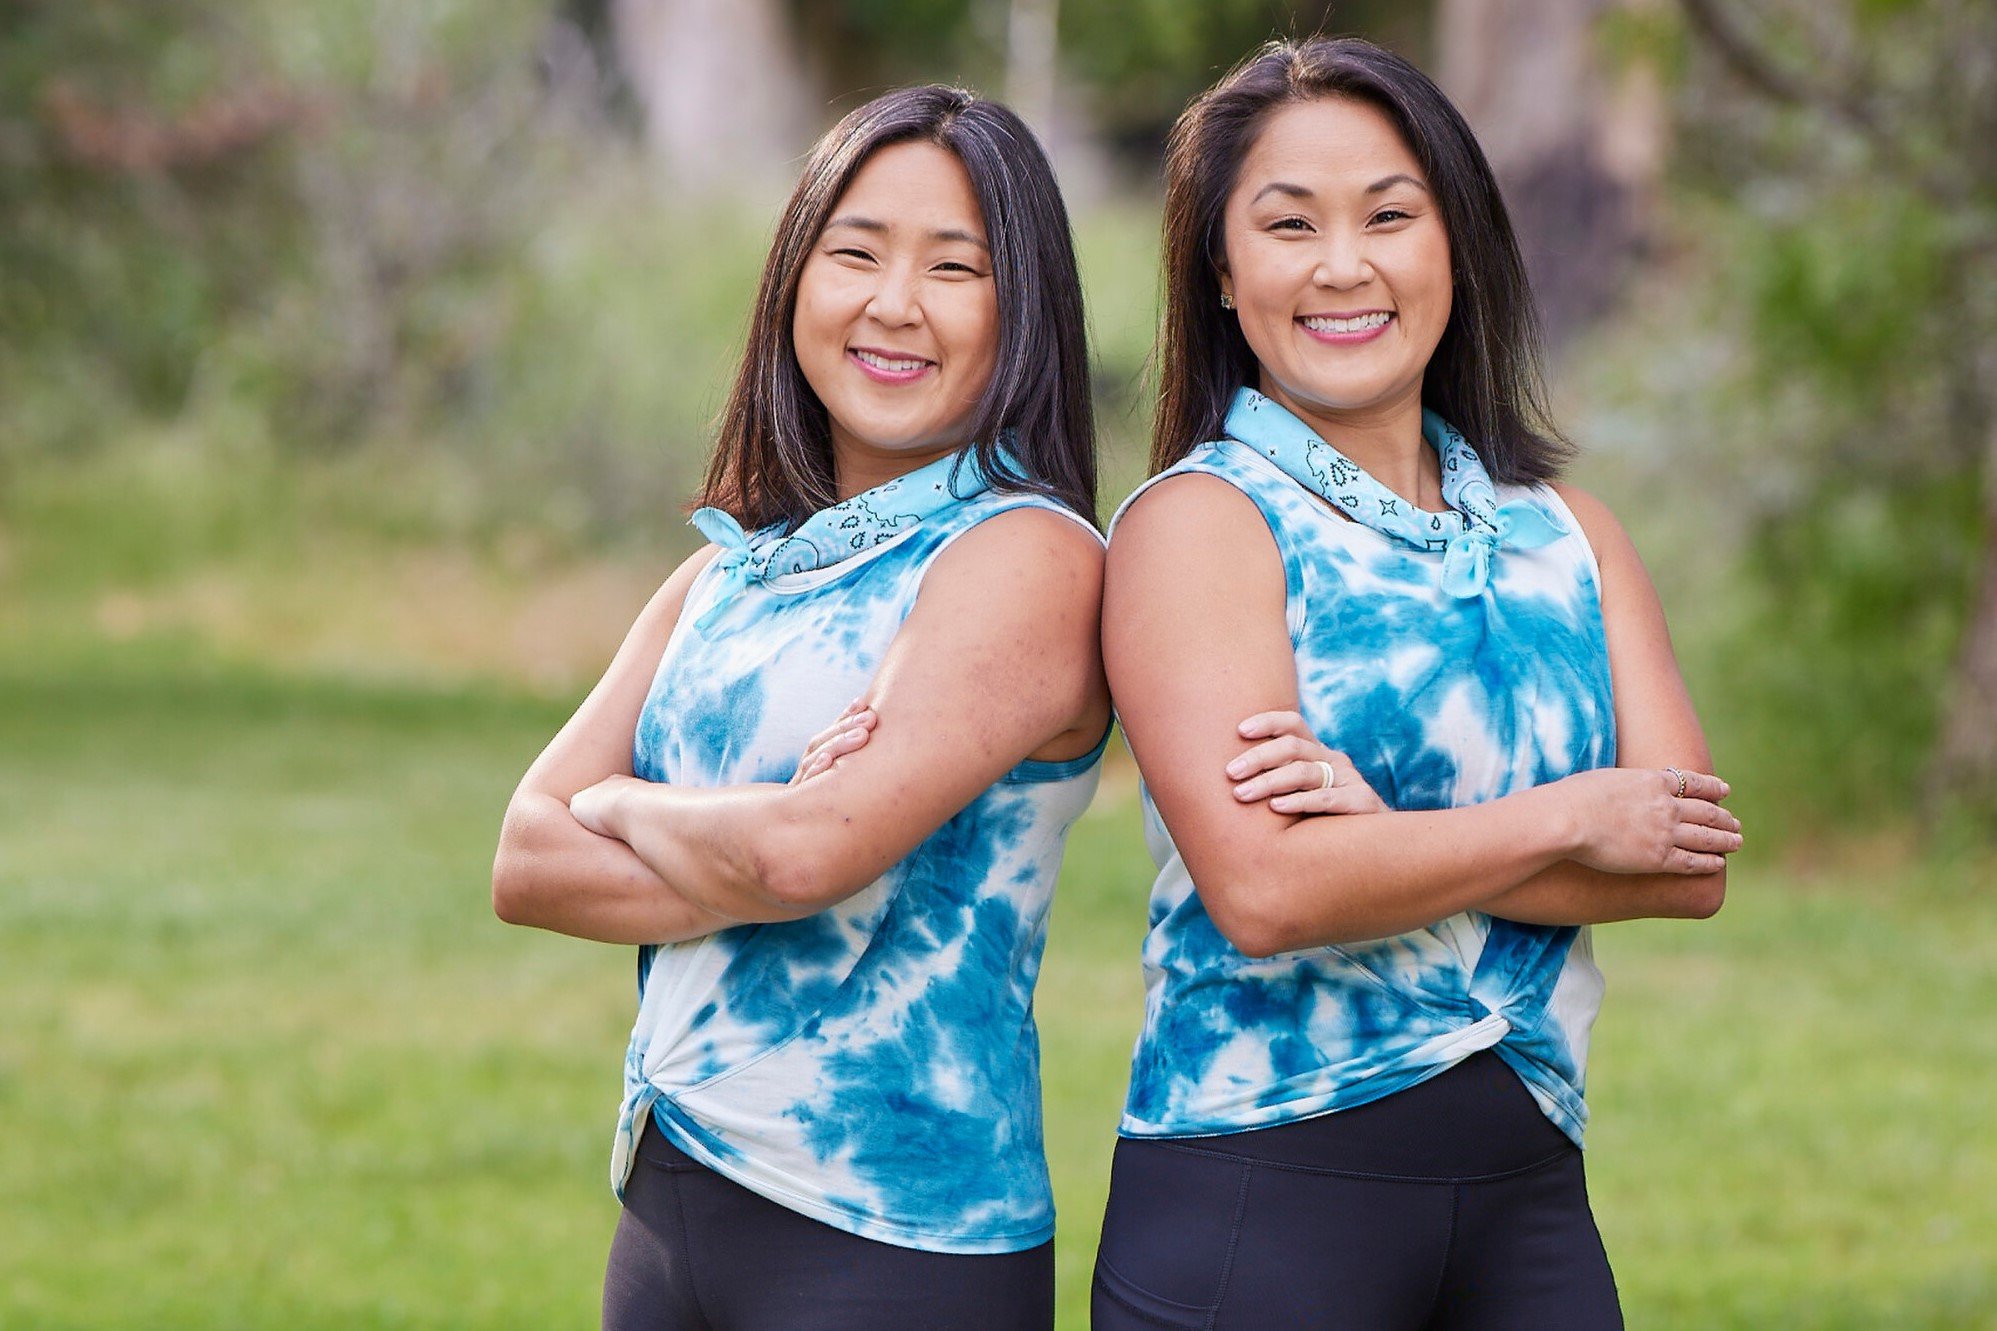 Emily Bushnell and Molly Sinert, who star in 'The Amazing Race 34' on CBS, pose for promotional pcitures. The twins weare the same blue and white tie dye tank top and black leggings.